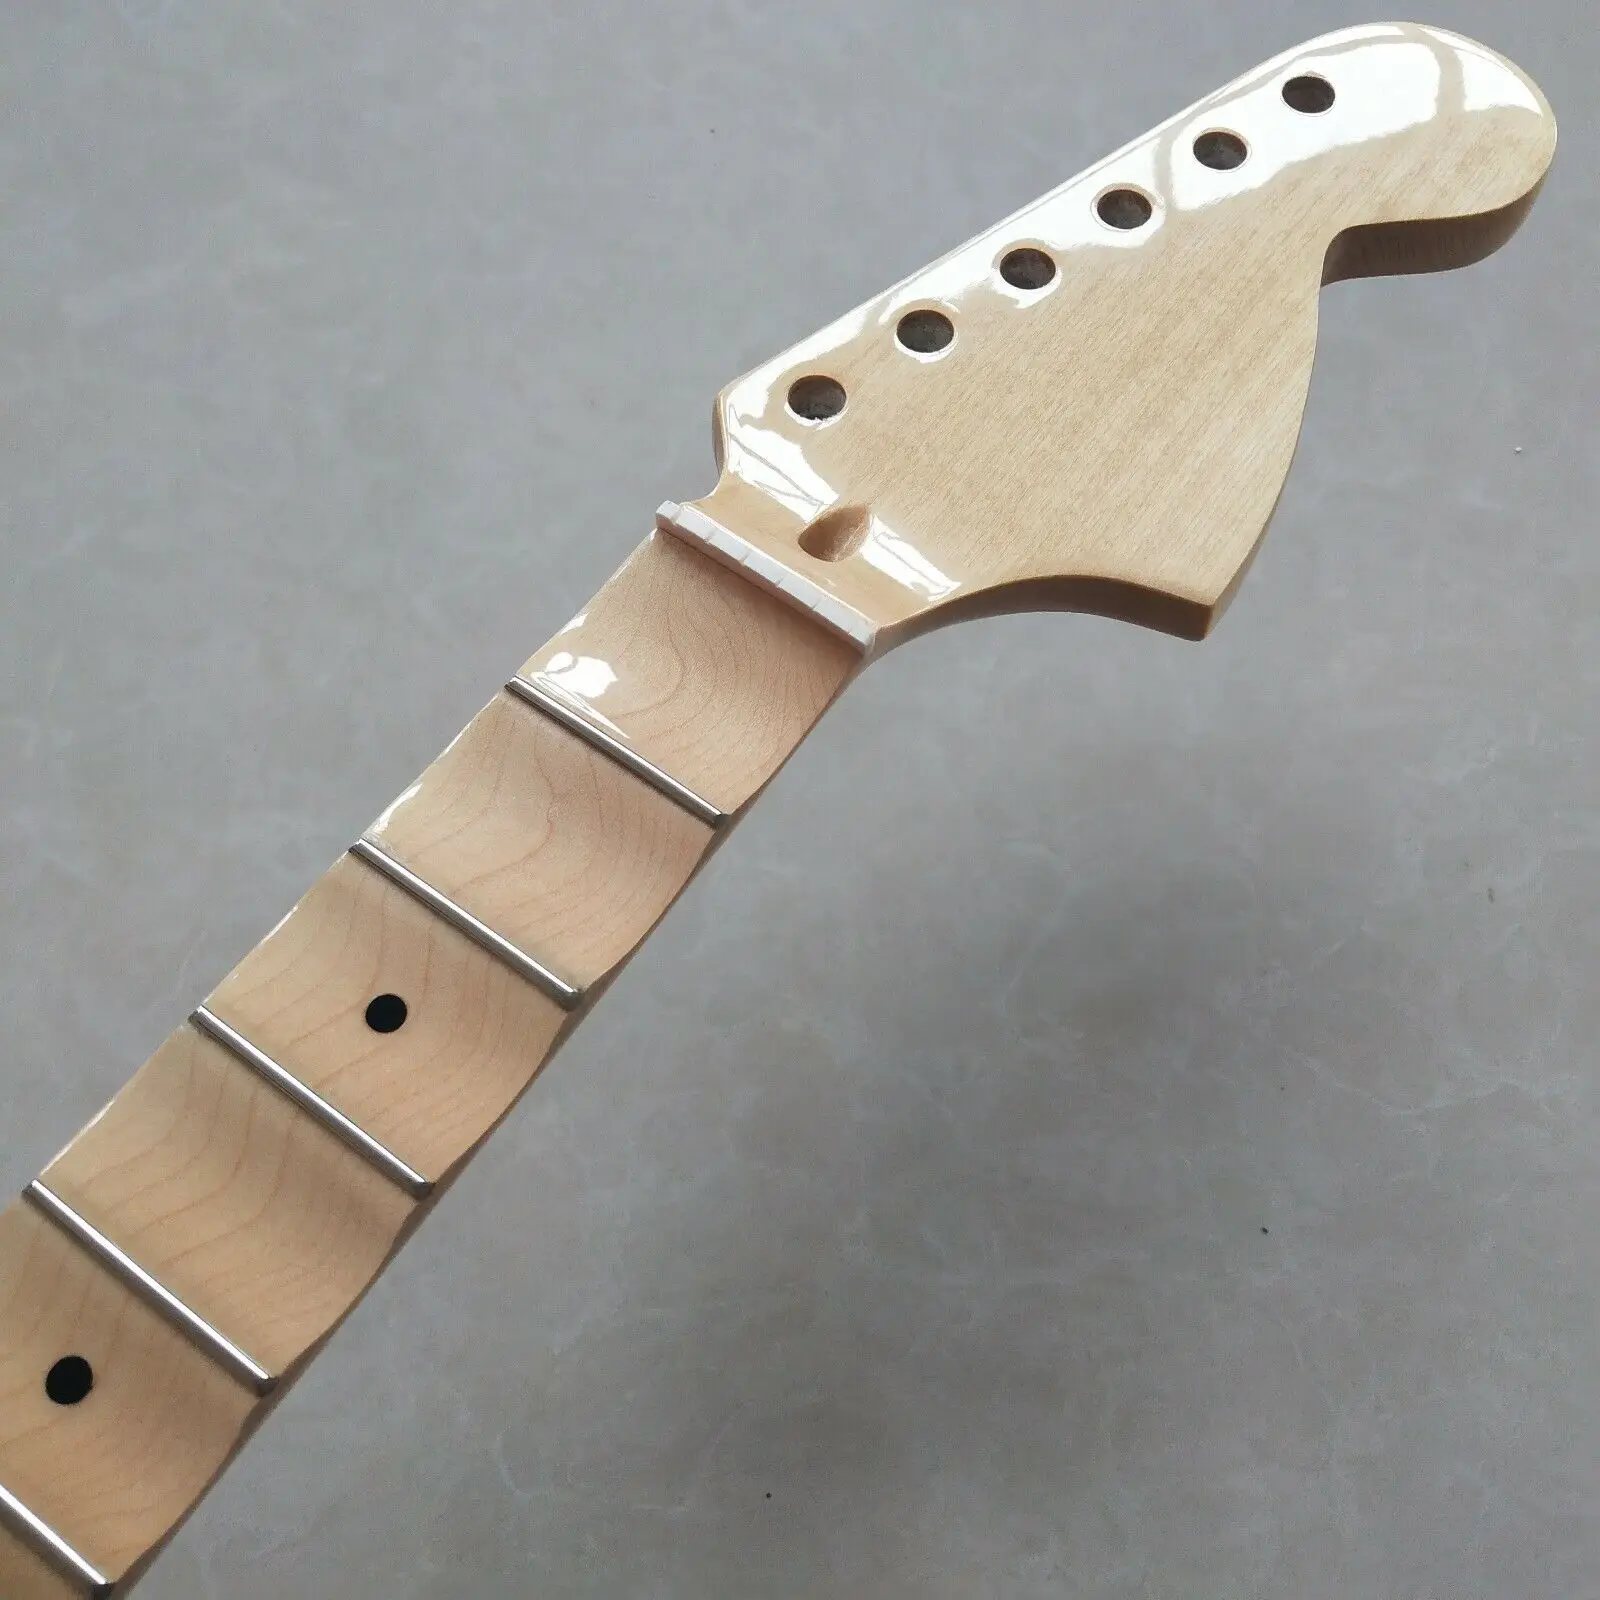 Gloss Big head Full scalloped Guitar neck Replace 22 Fret 25.5in Maple Fretboard enlarge